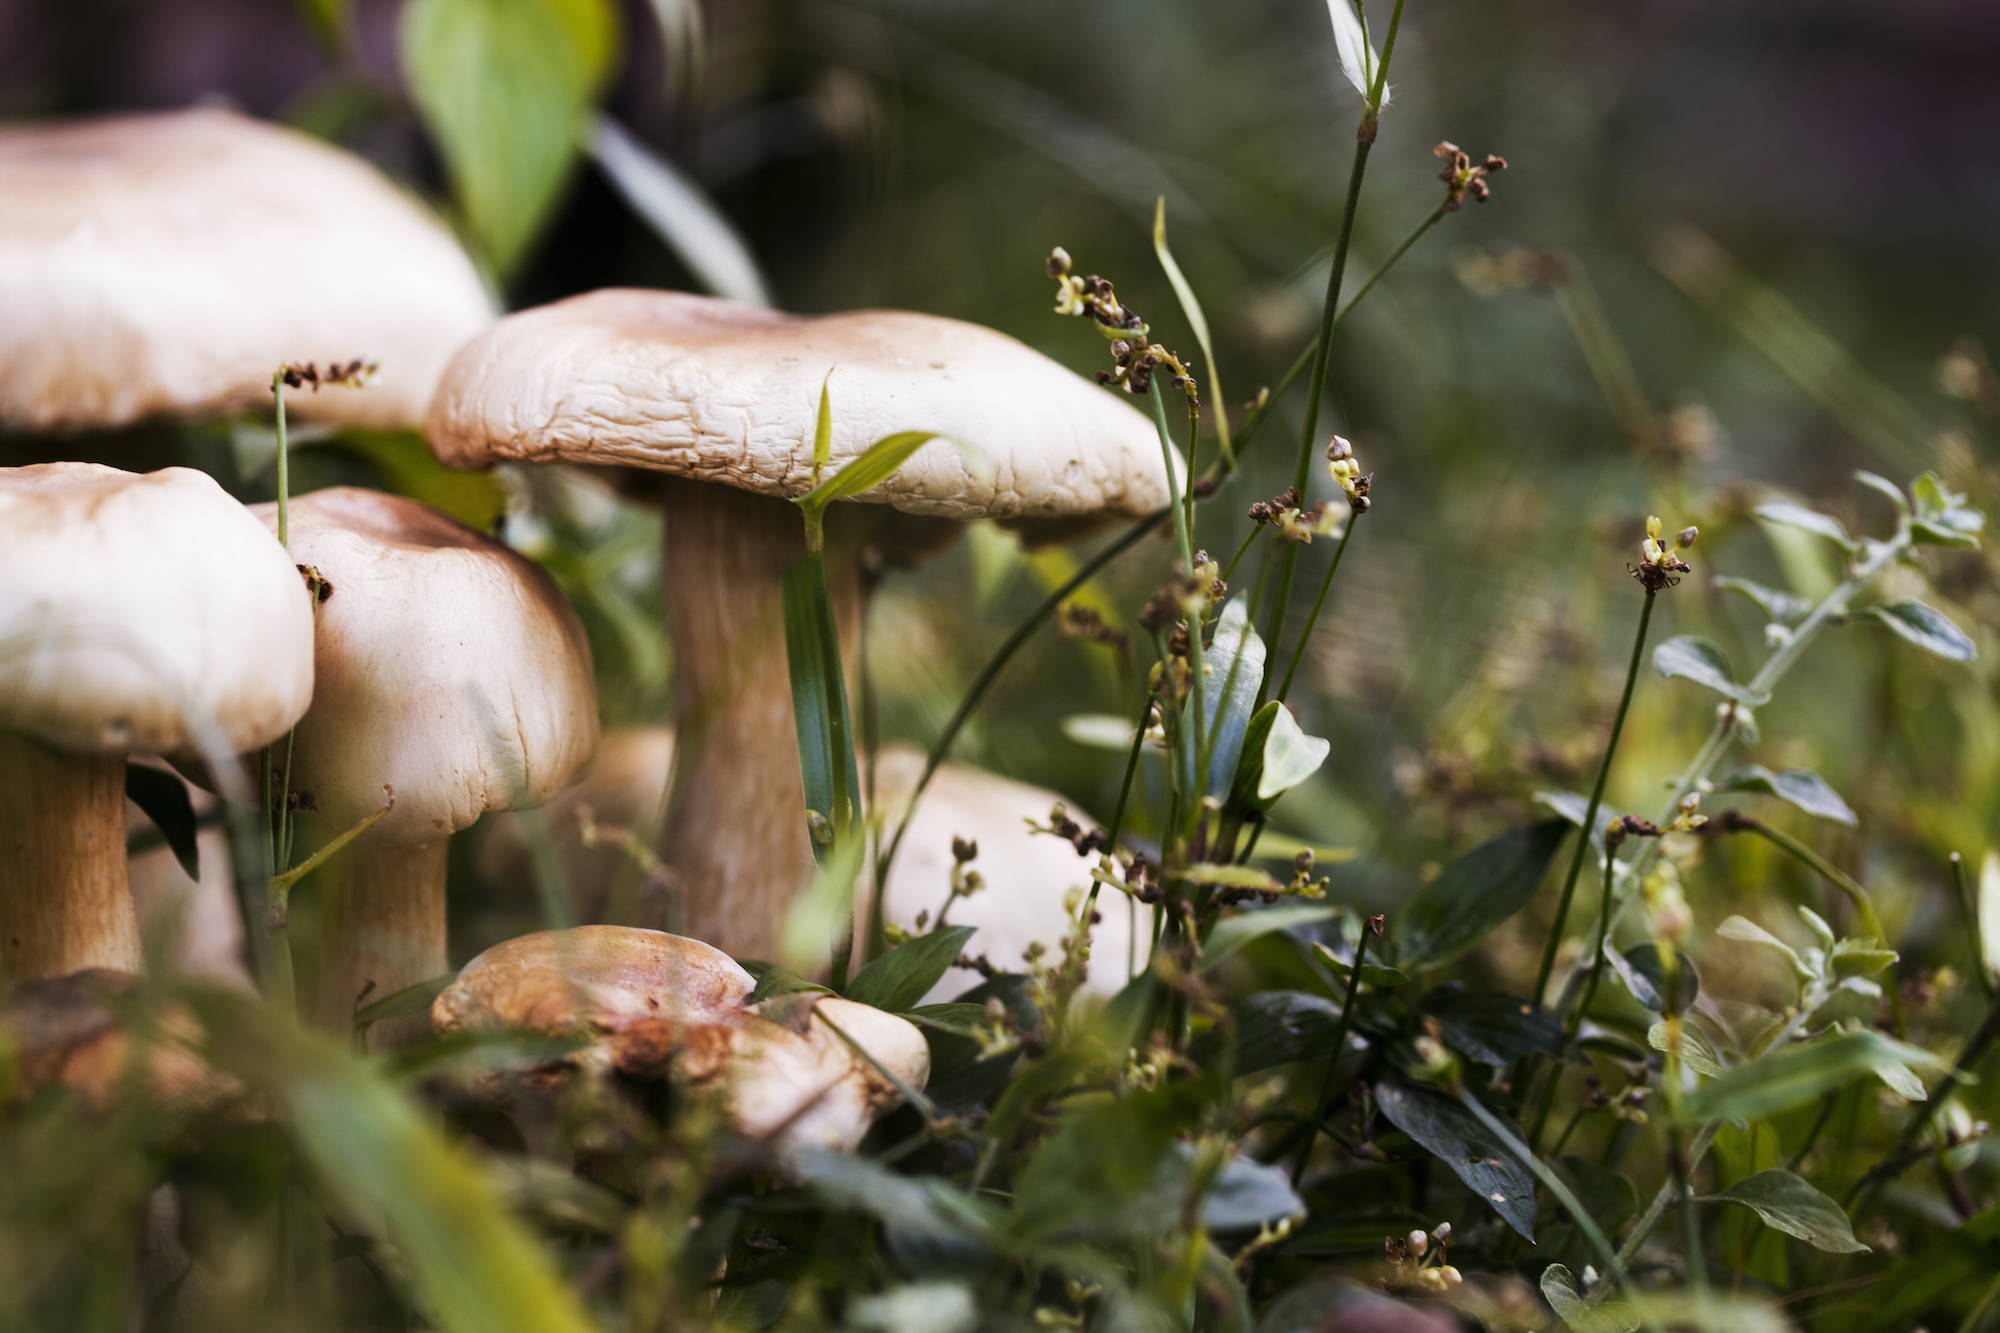 Mushrooms are not a good way to achieve optimal vitamin D levels